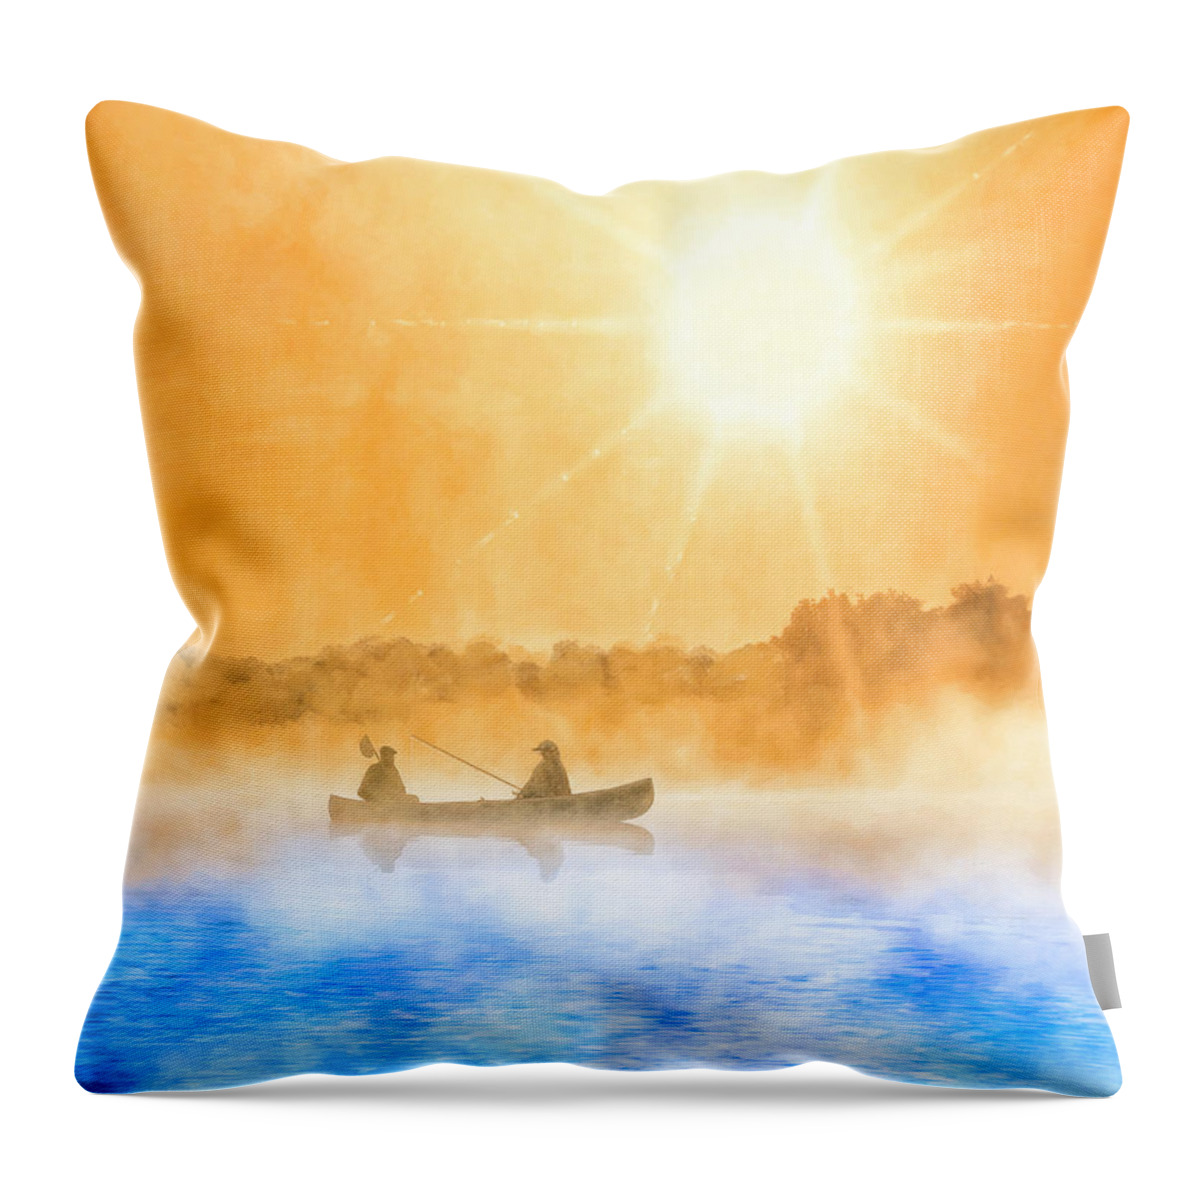 Fishing Throw Pillow featuring the mixed media Quiet Moments - Fishing At Dawn by Mark Tisdale